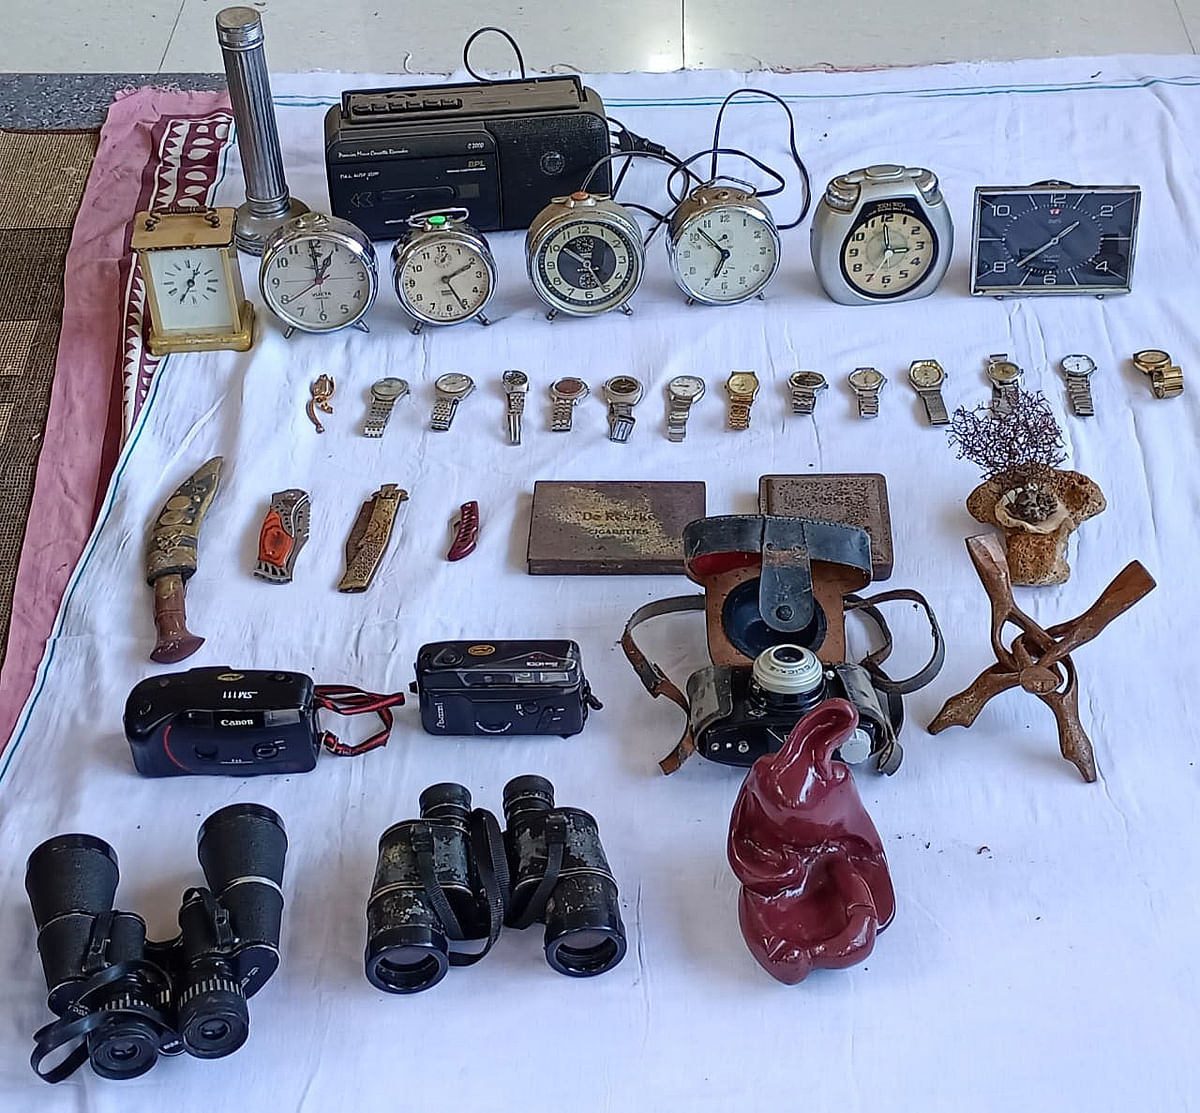 Miscellaneous items in the collection including binoculars and clocks.